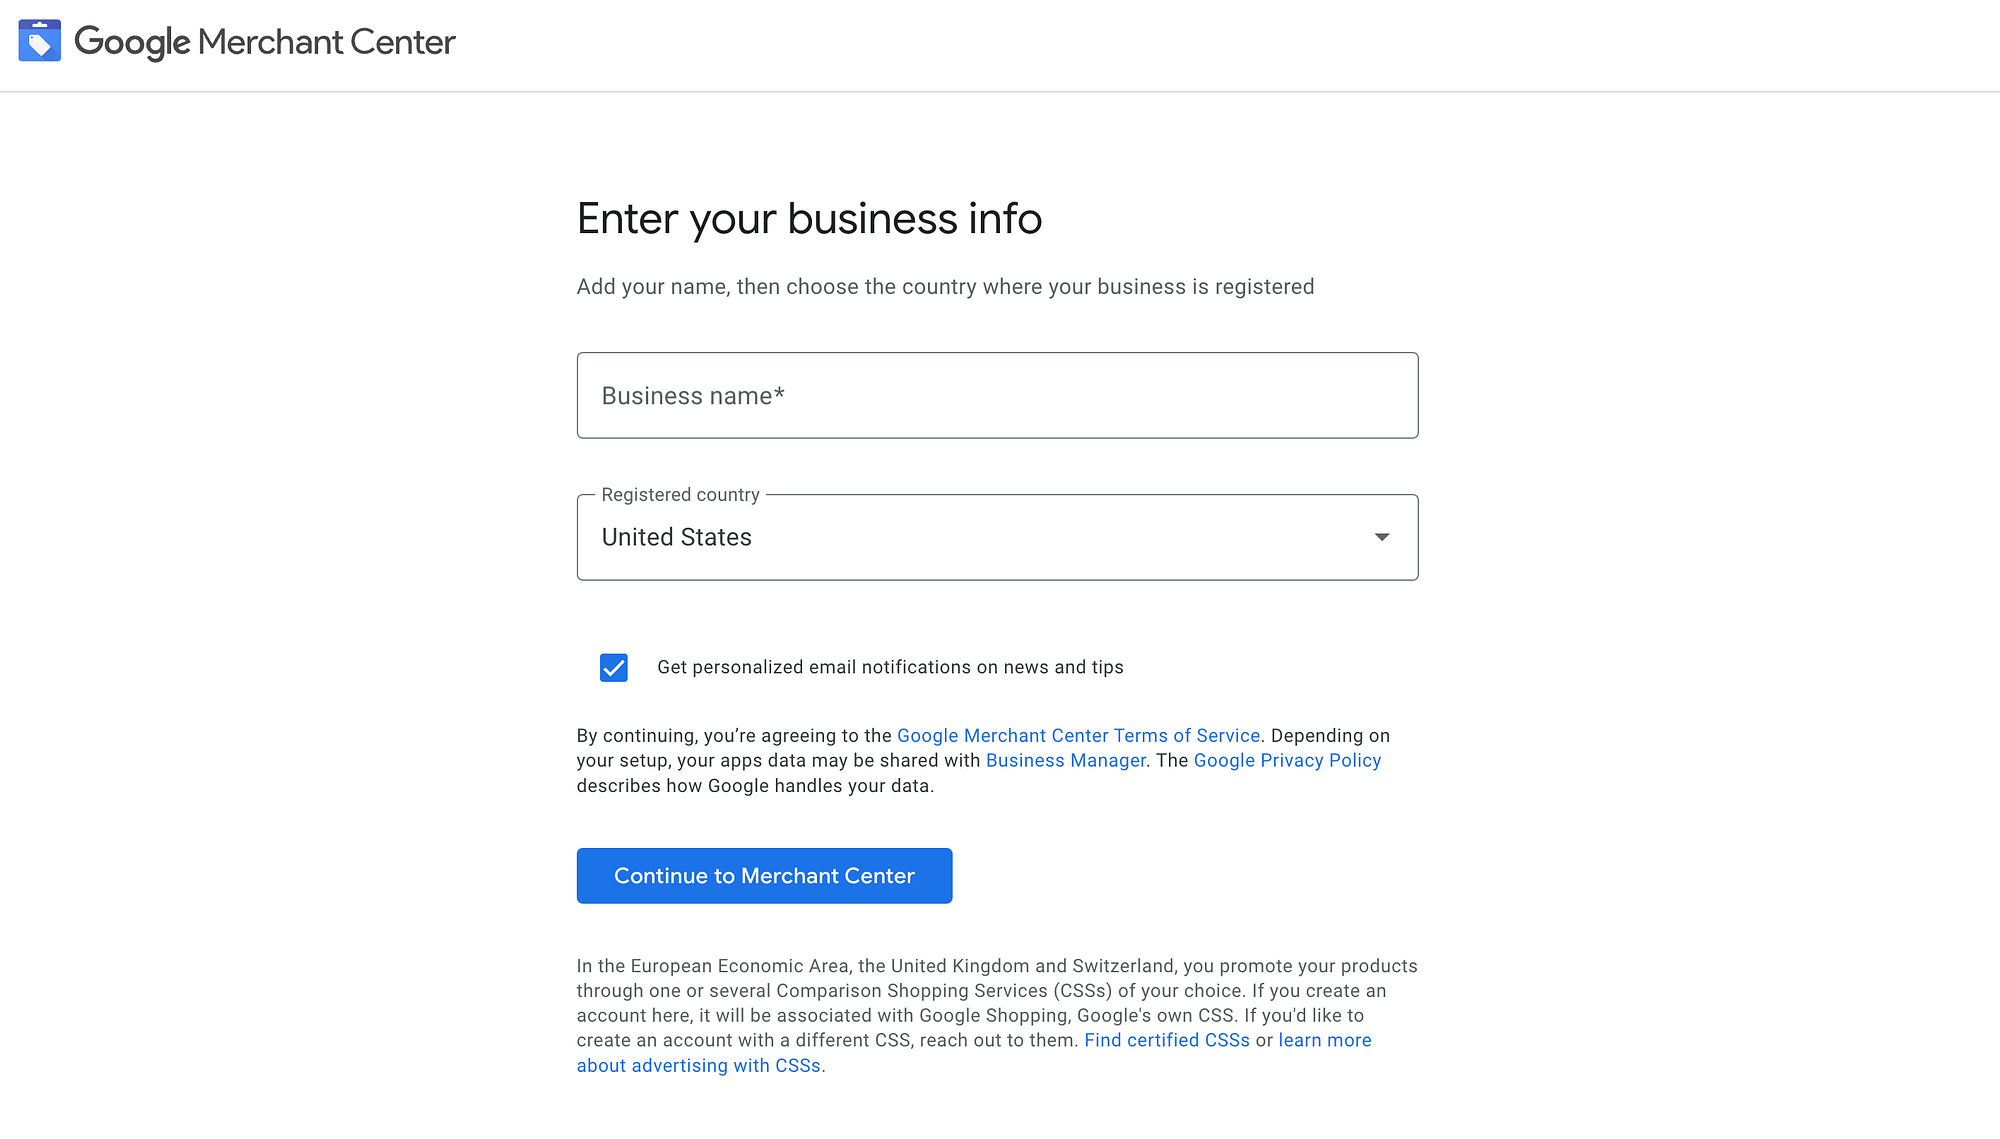 The enter business information in Google Merchant Center page.